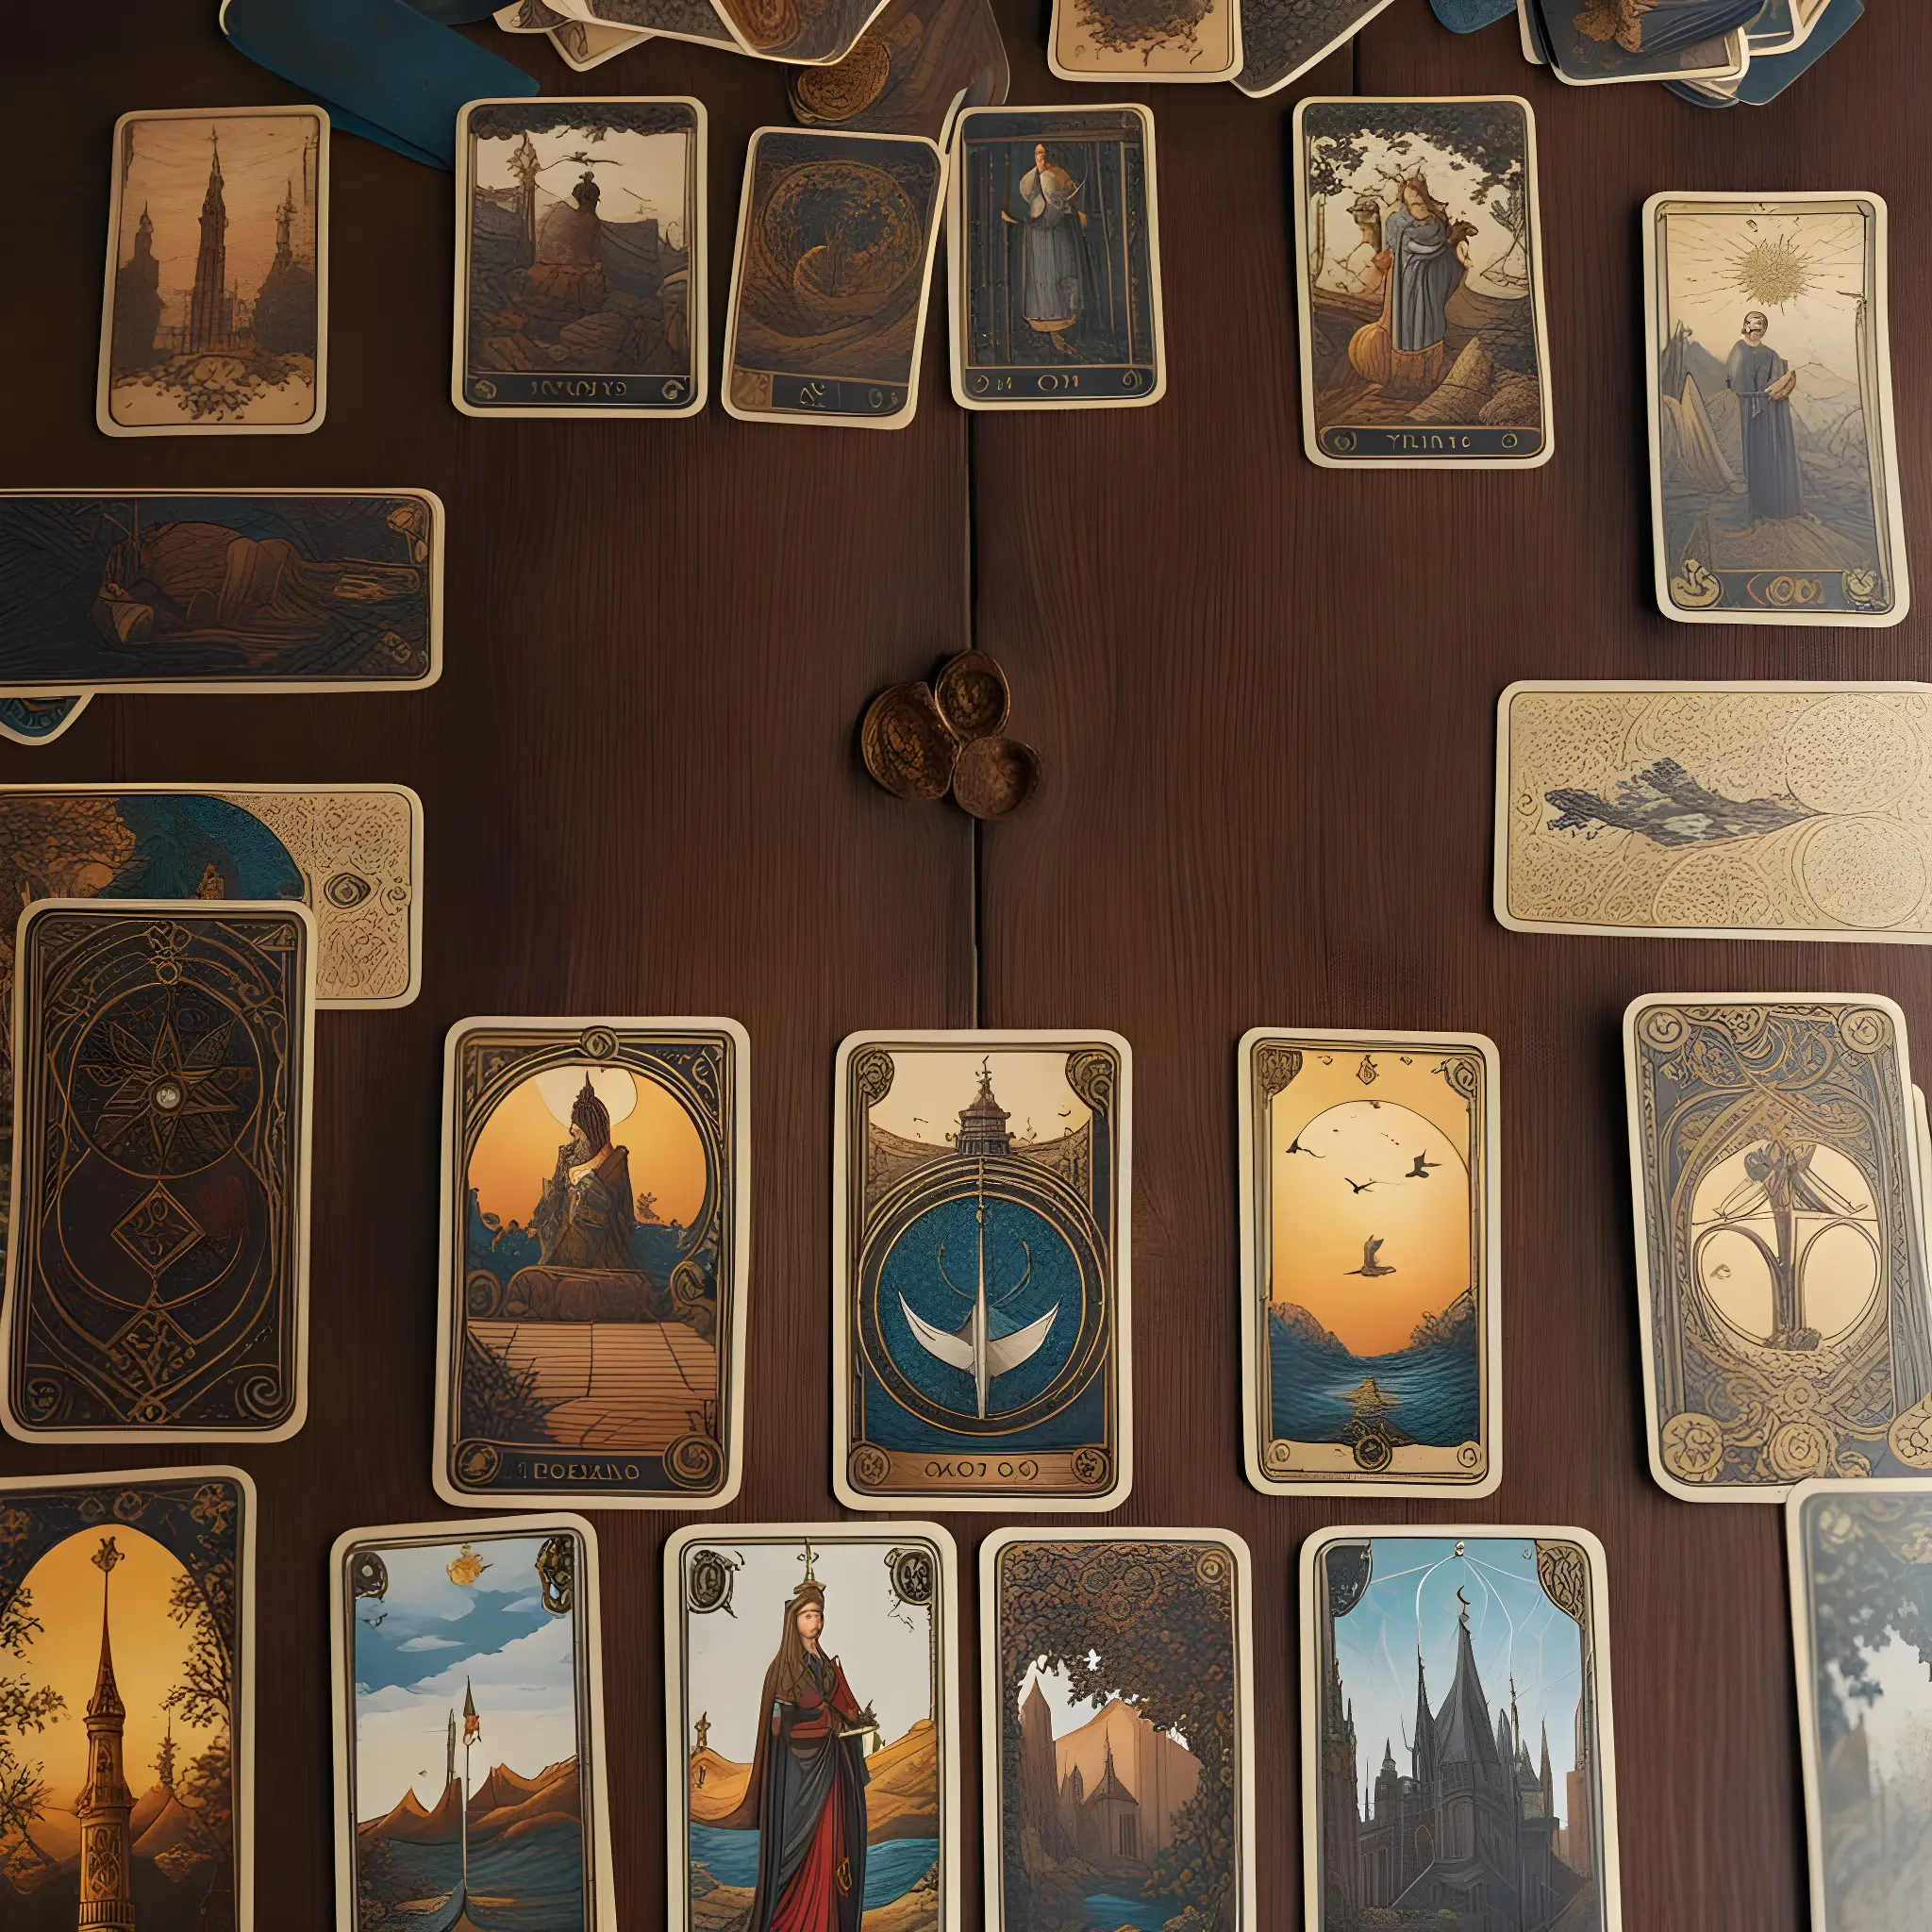 Artistically arranged Tarot Card deck on a wooden table, showcasing intricate artwork and symbols.